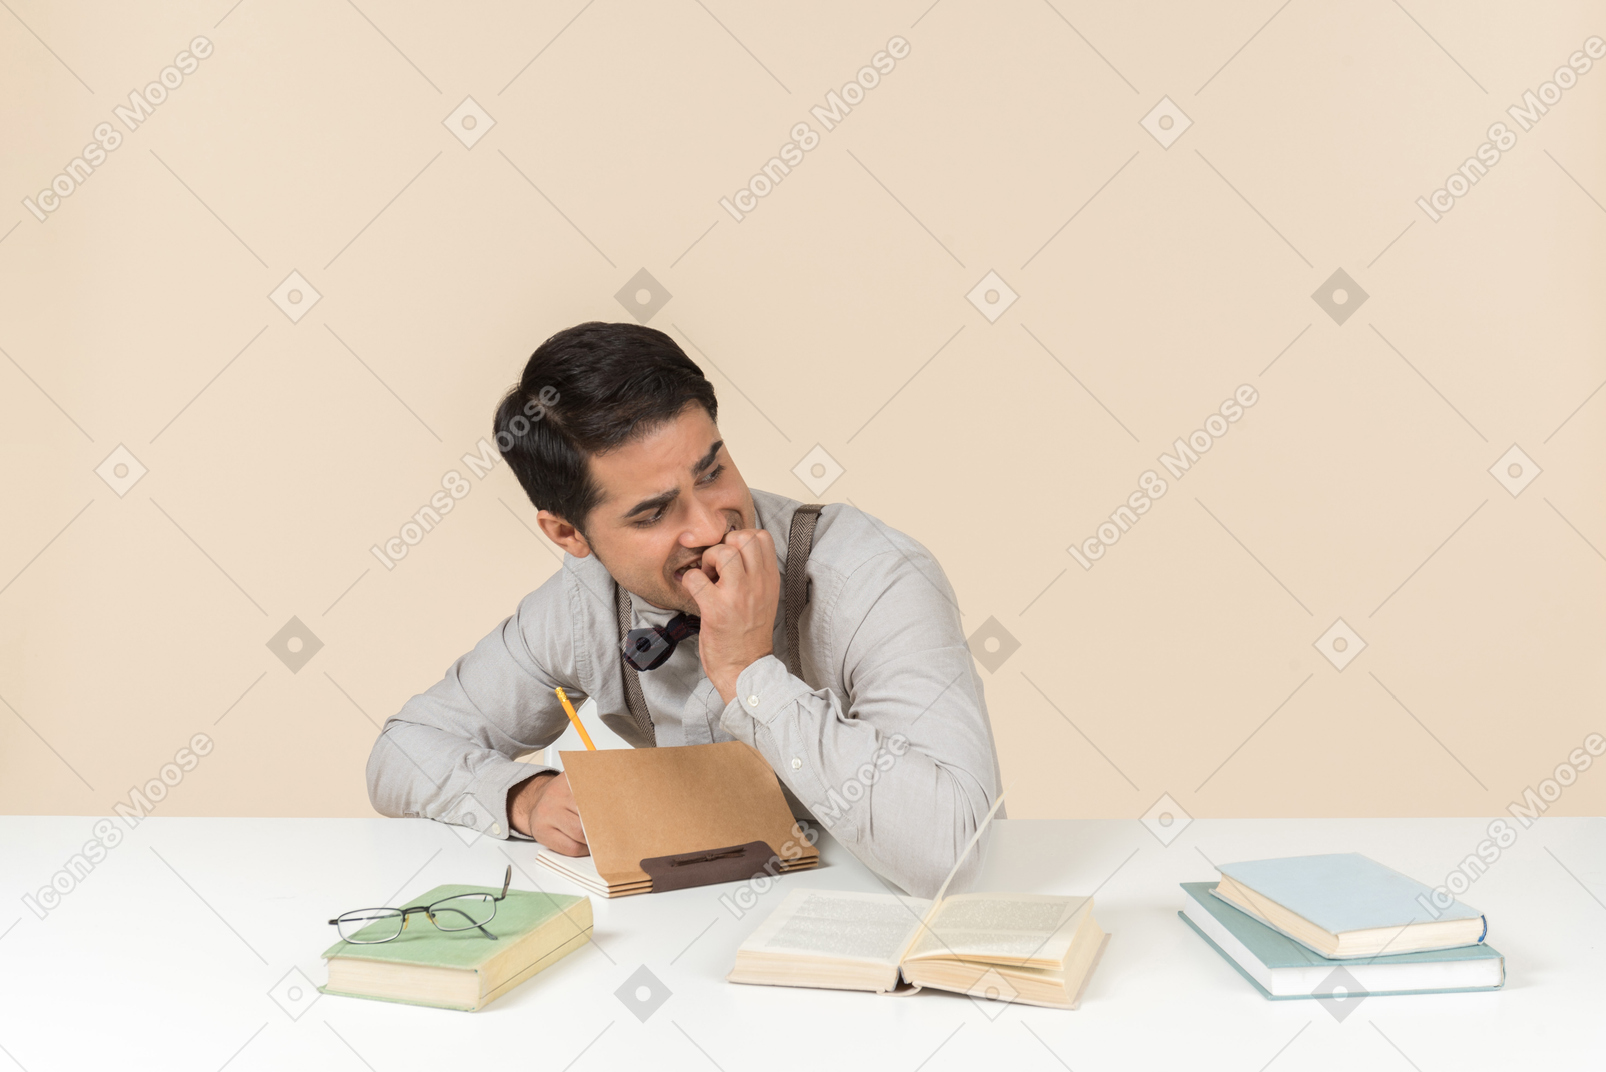 Laughing young caucasian student sitting at the table and writing something down in the notebook